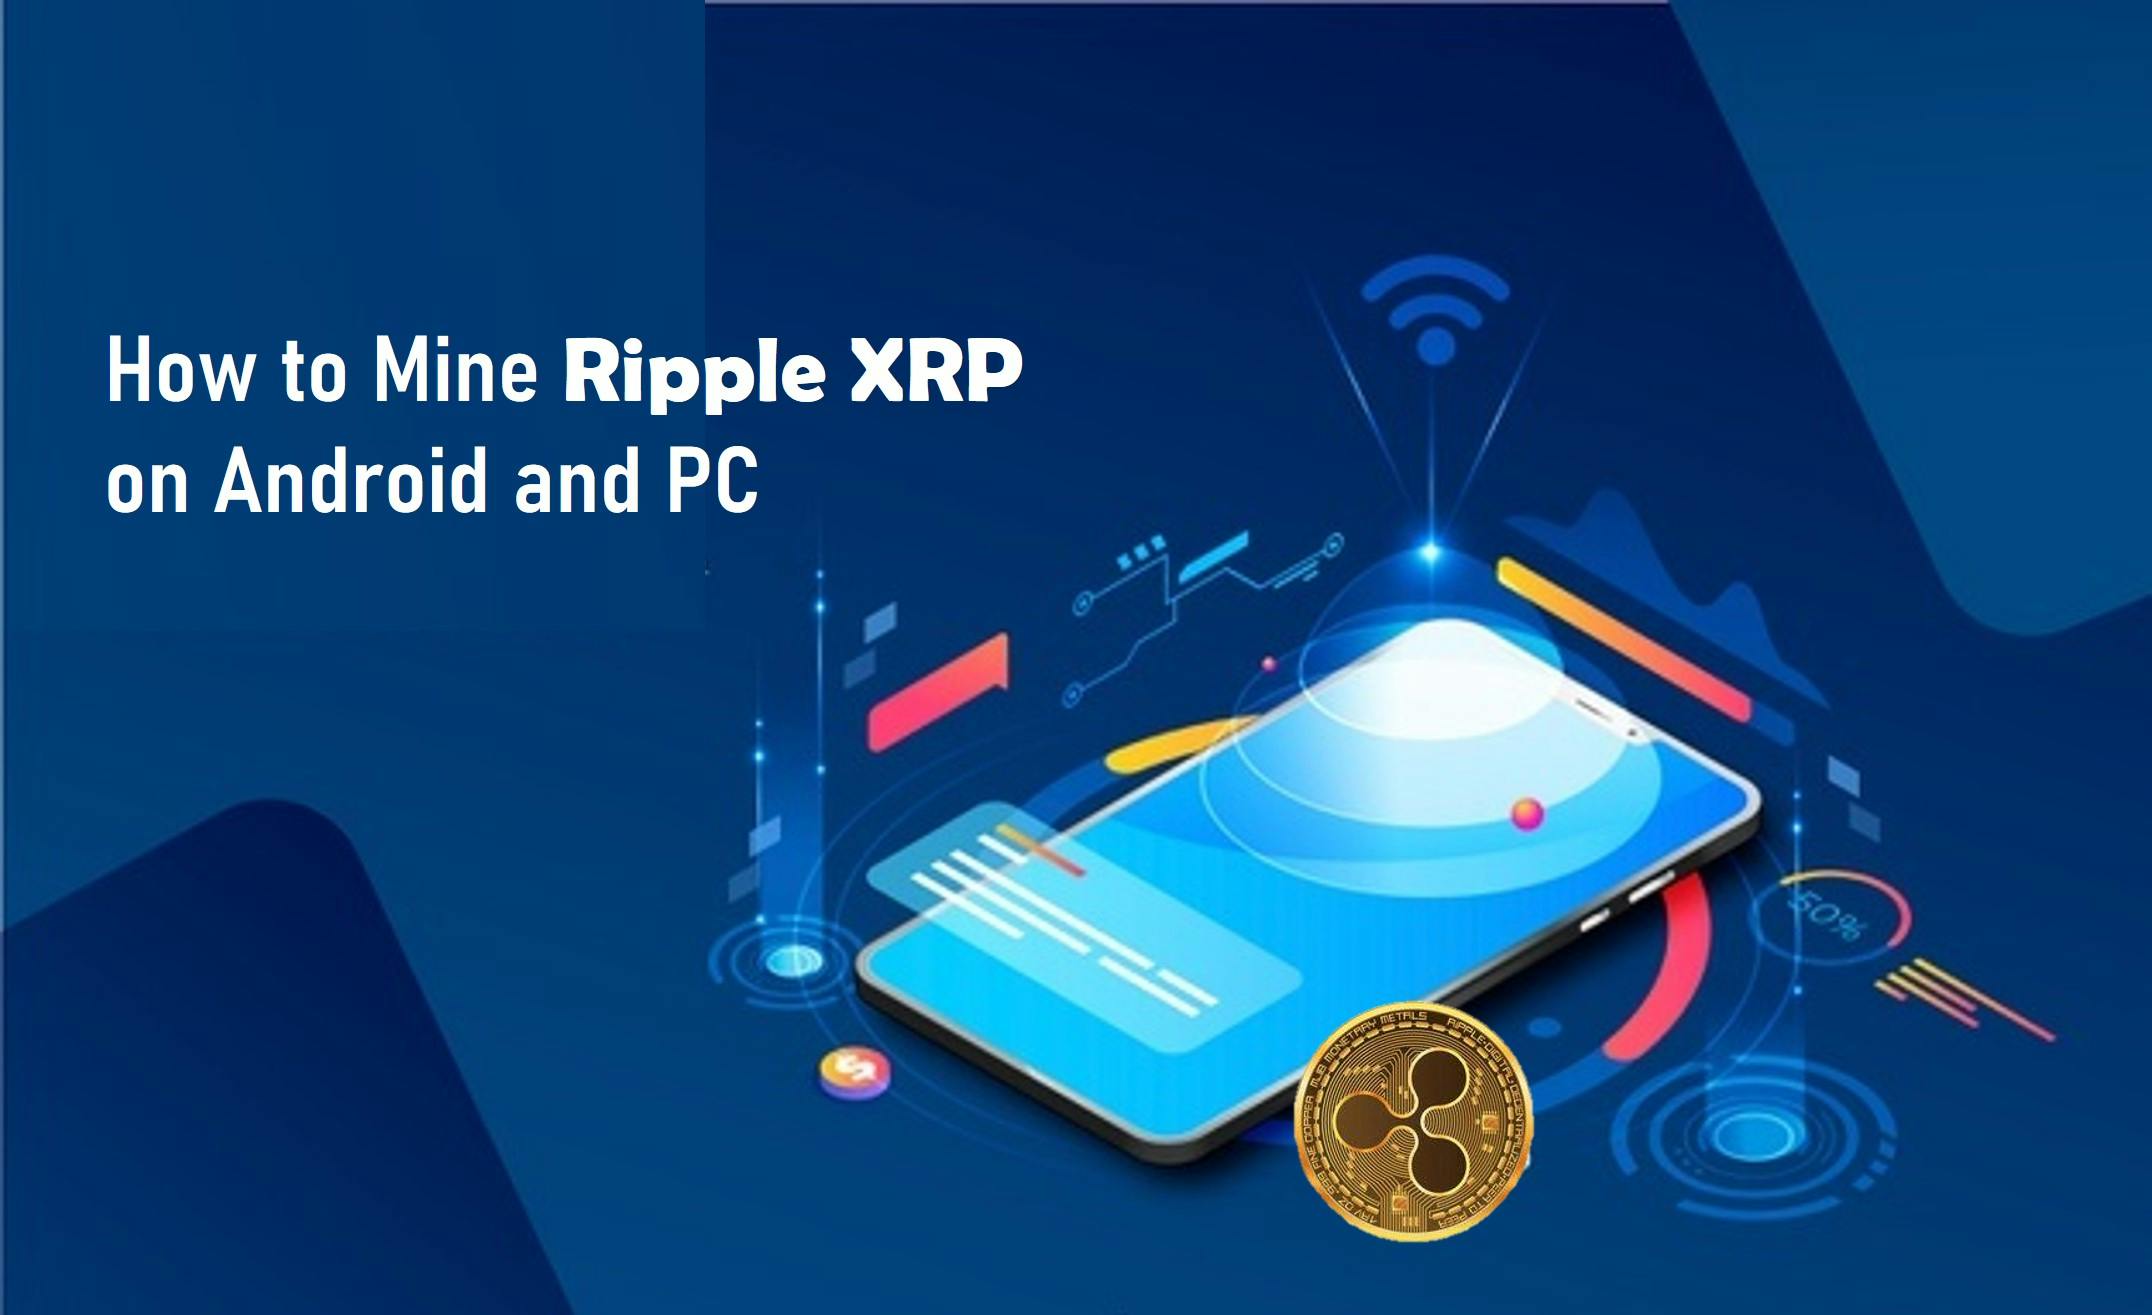 How to Mine Ripple XRP on Android and PC